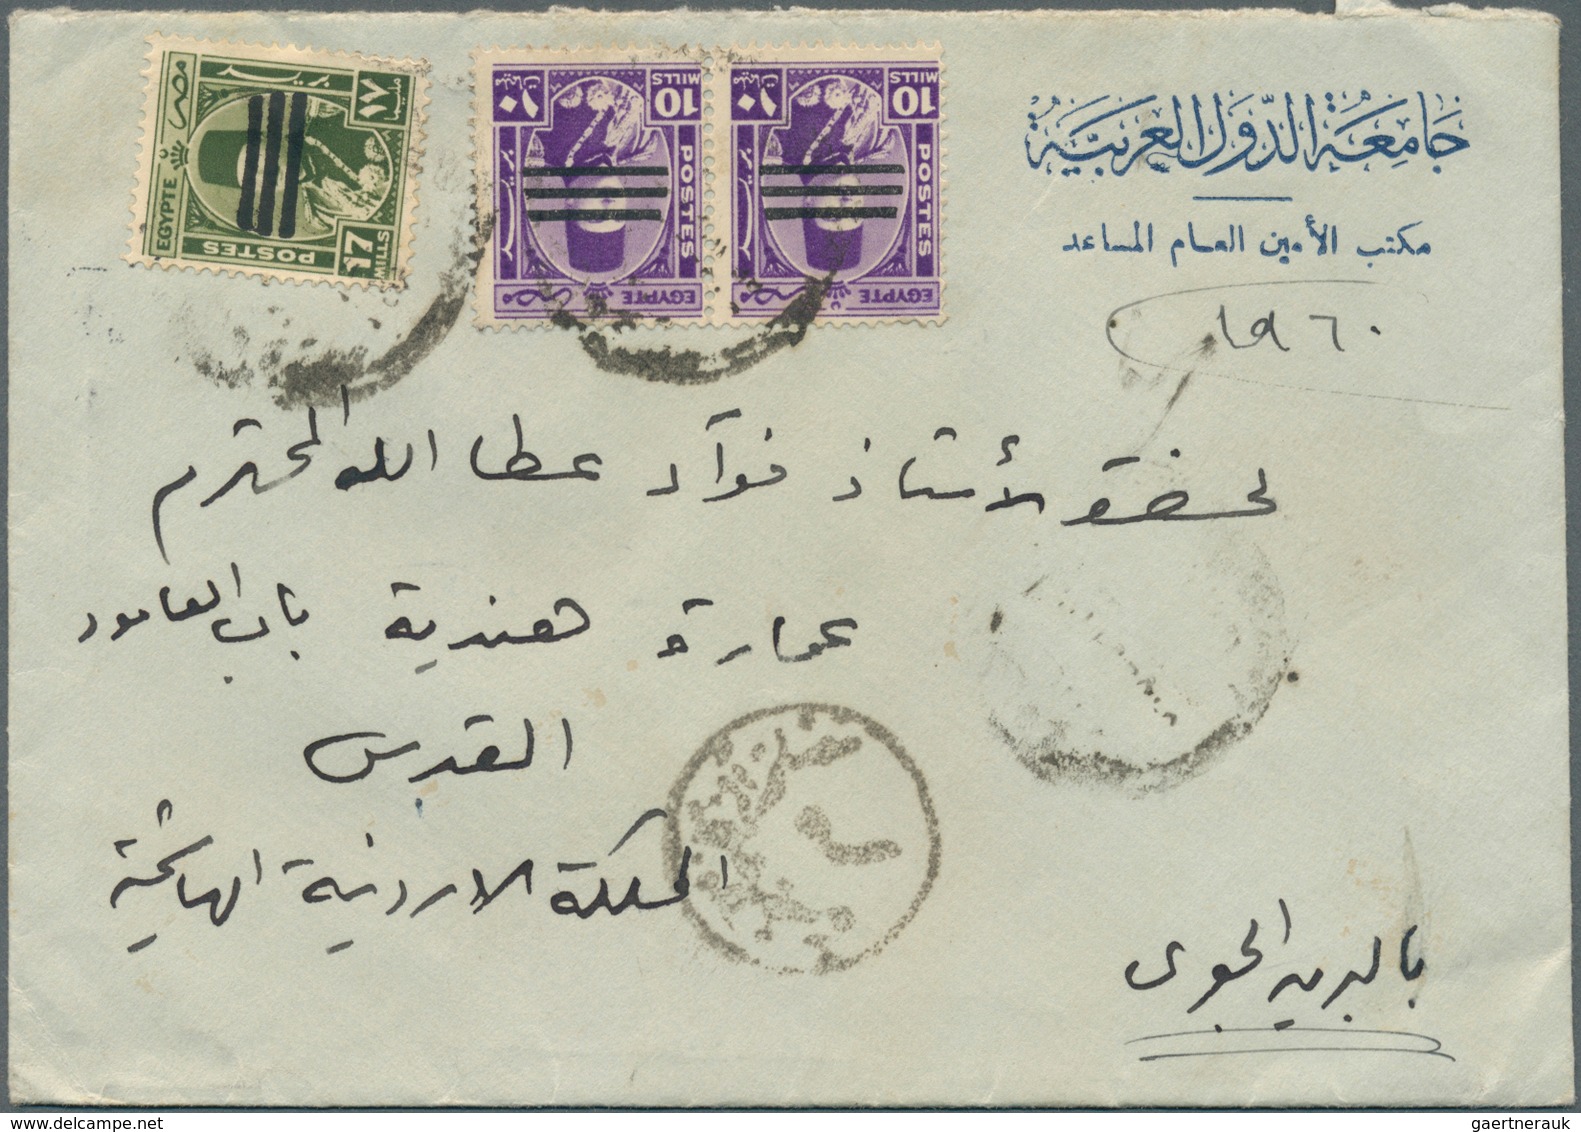 29401 Ägypten: 1900-70, Big box containing 695 covers & cards including postage due covers, air mails, cen